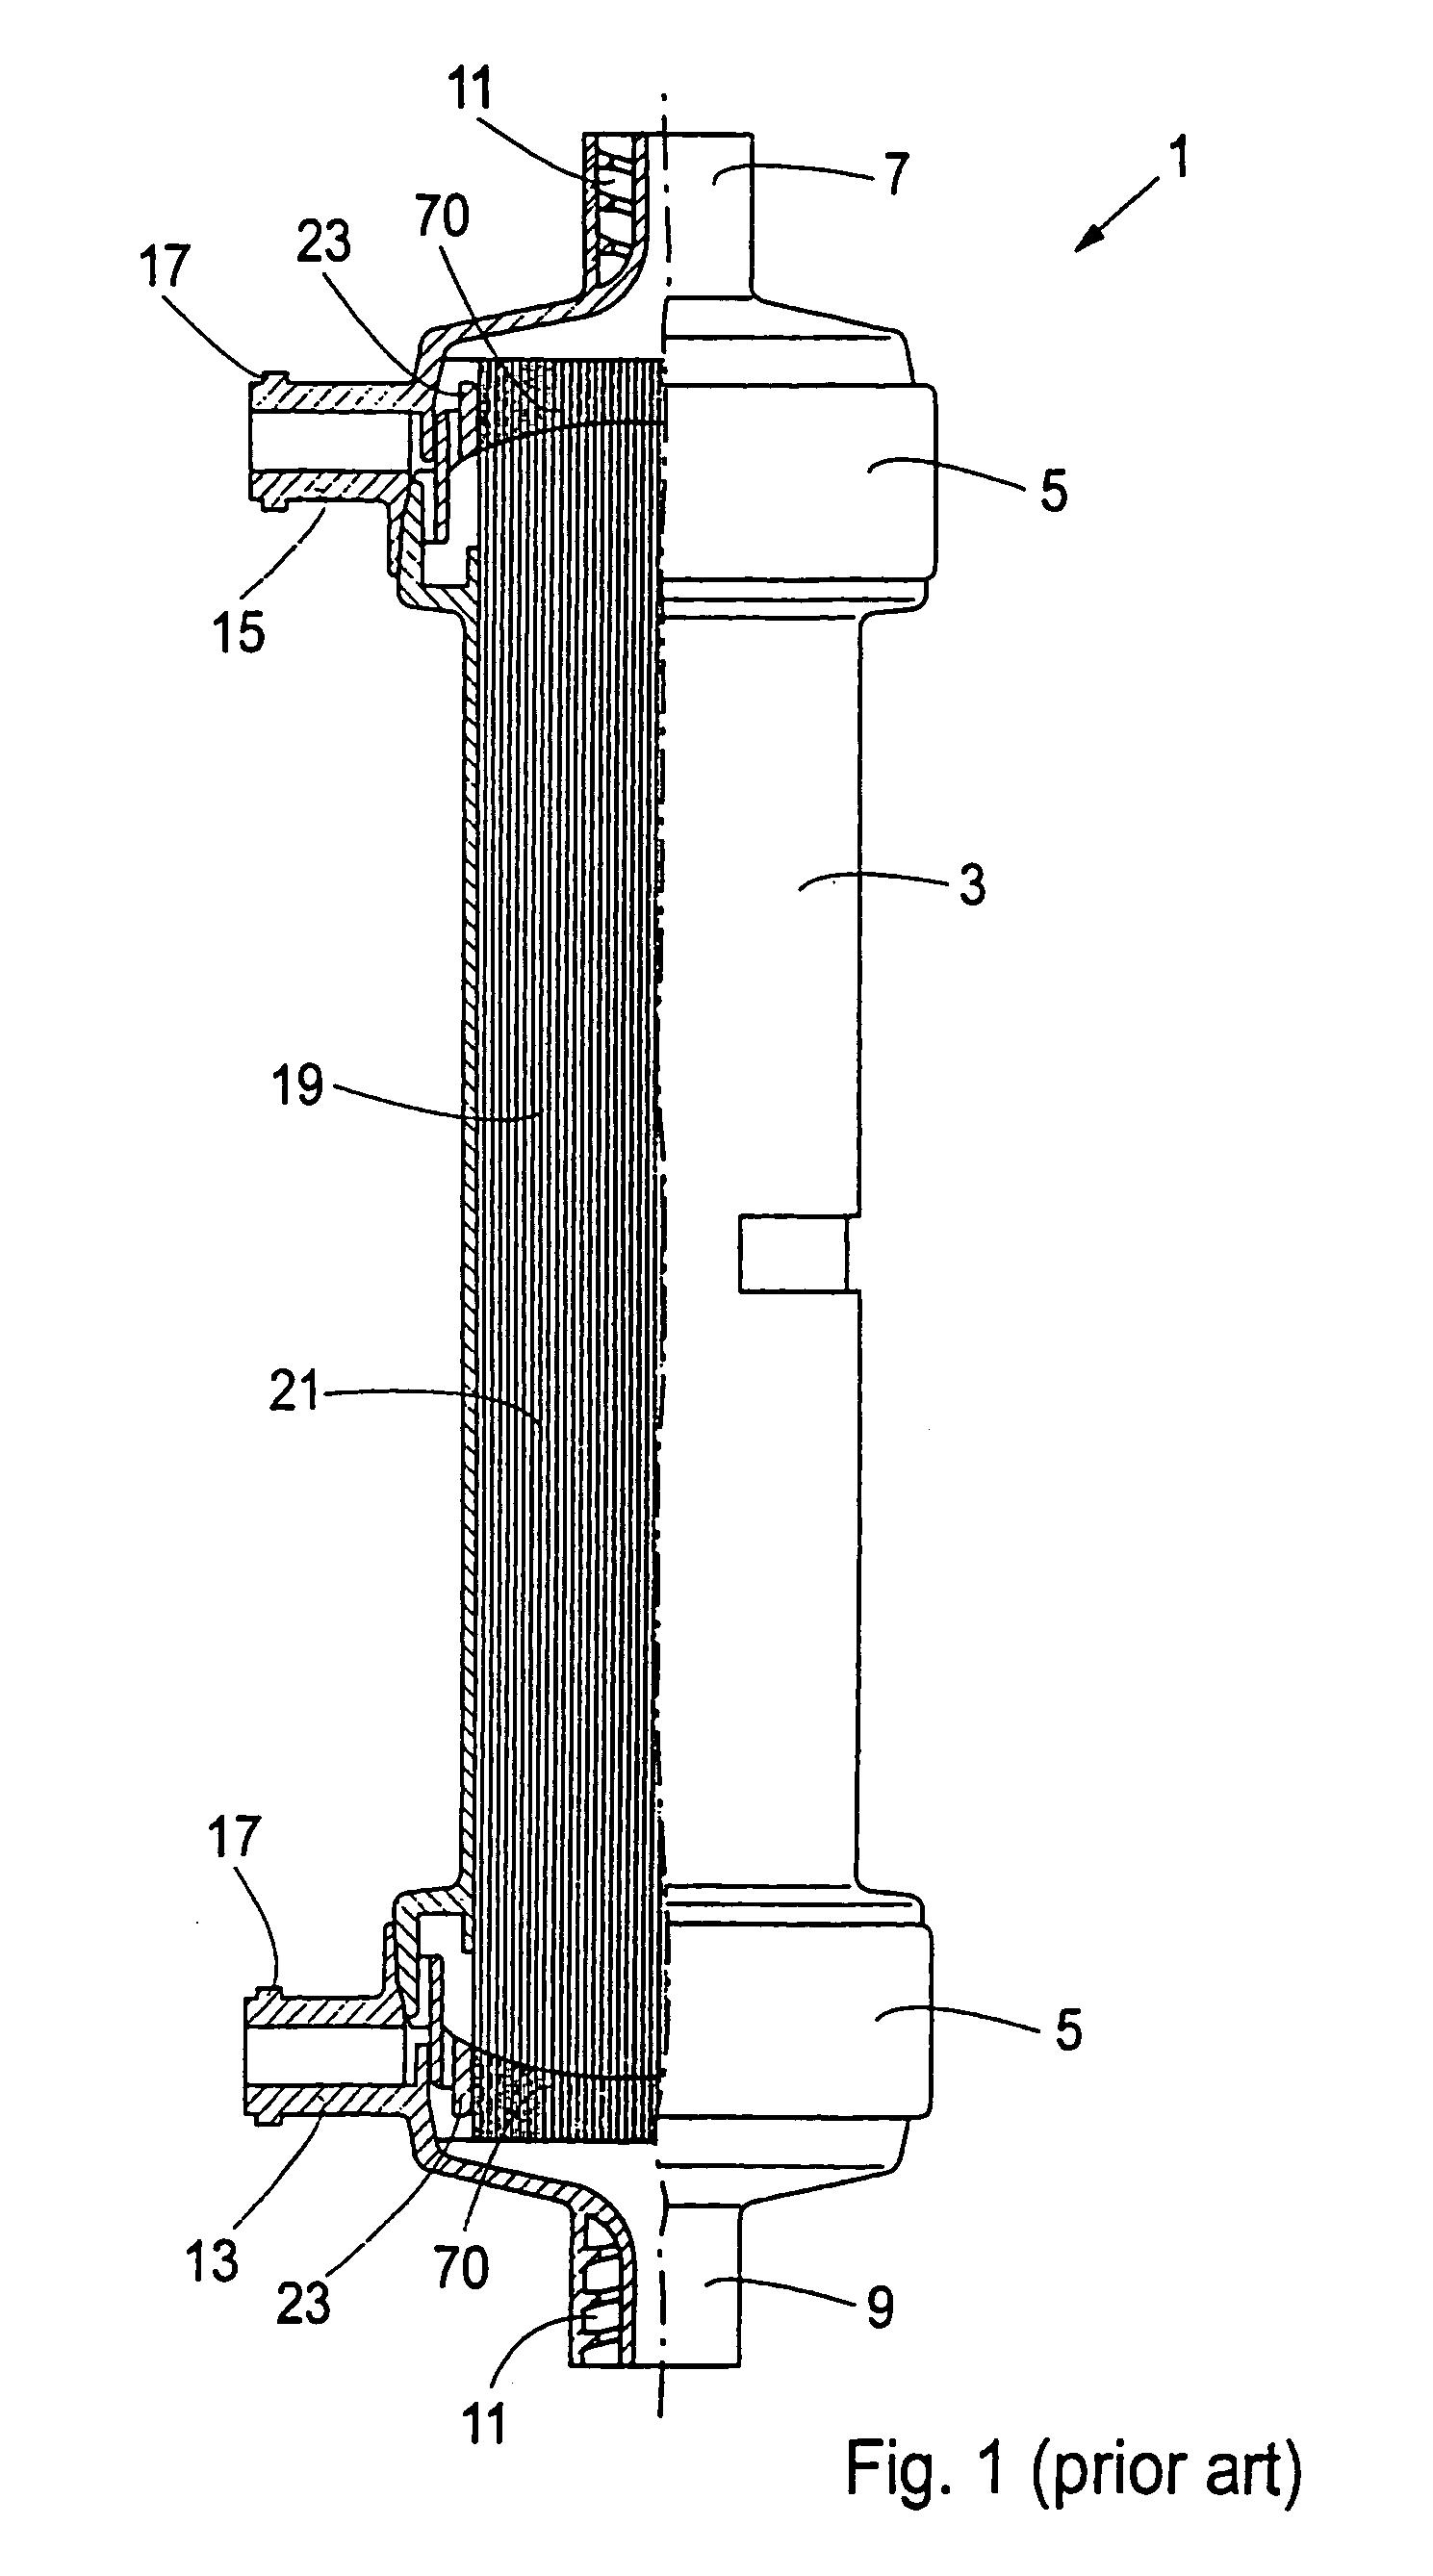 Filter comprising membranes made of hollow fibers